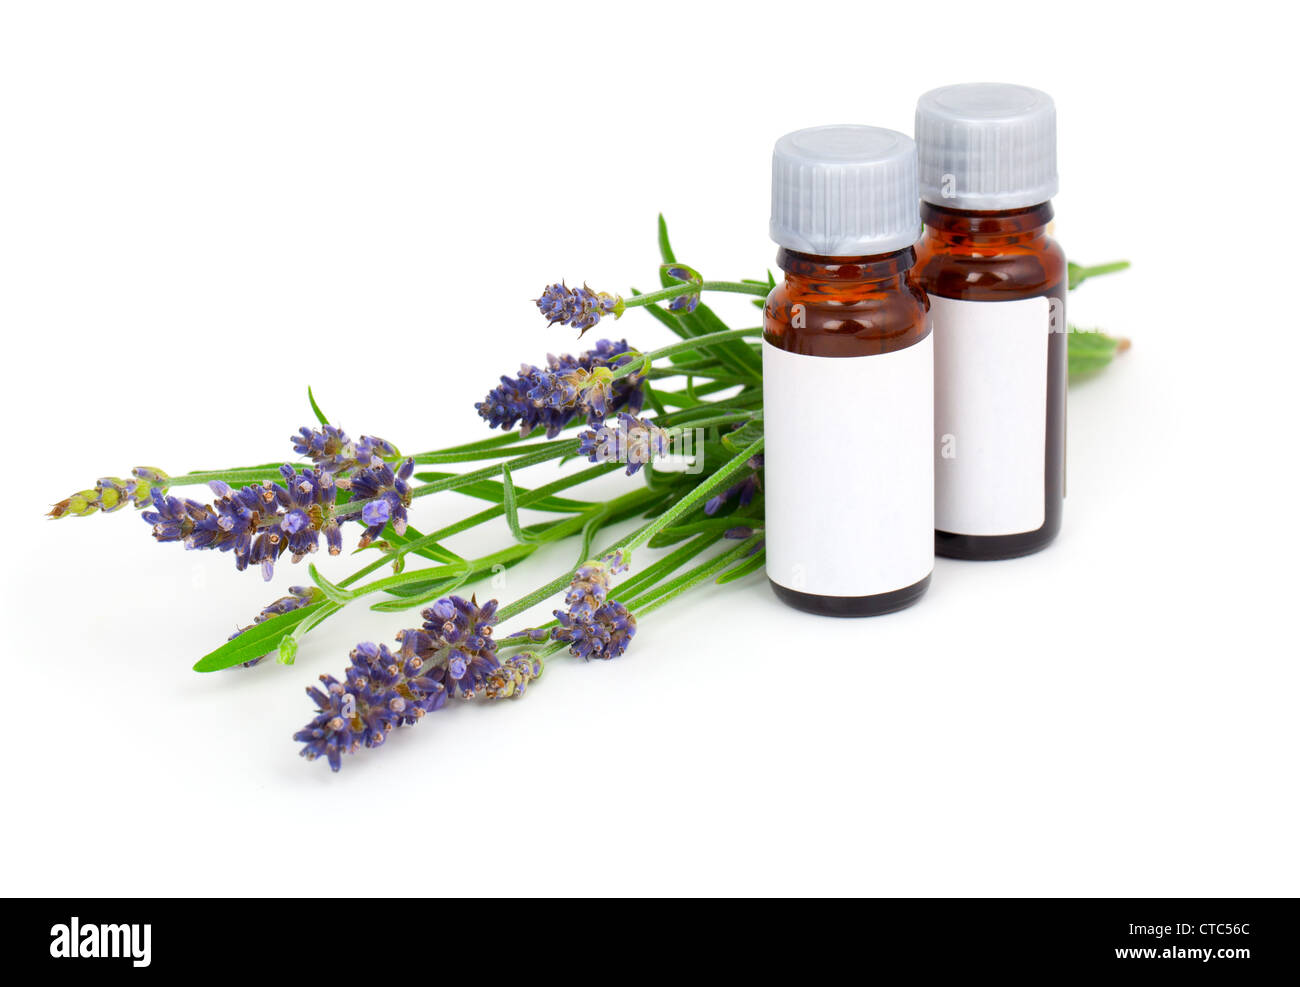 Aromatherapy Lavender oil and lavender flower, isolated on white background Stock Photo